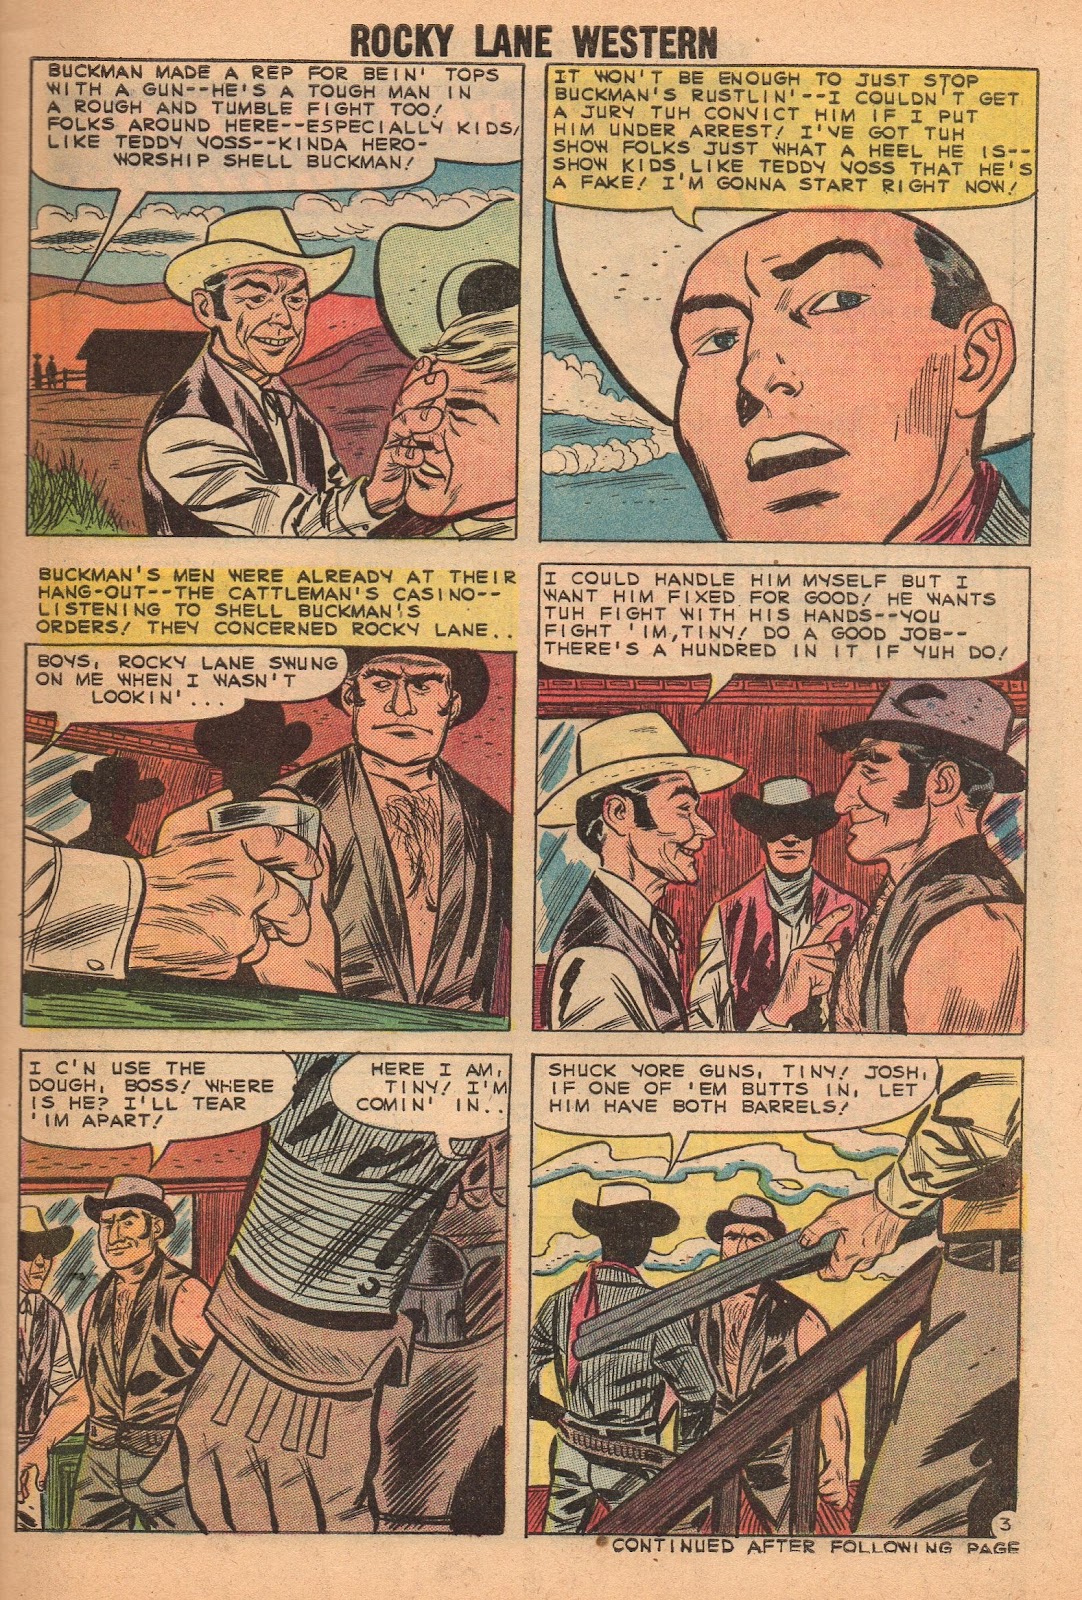 Rocky Lane Western (1954) issue 86 - Page 5